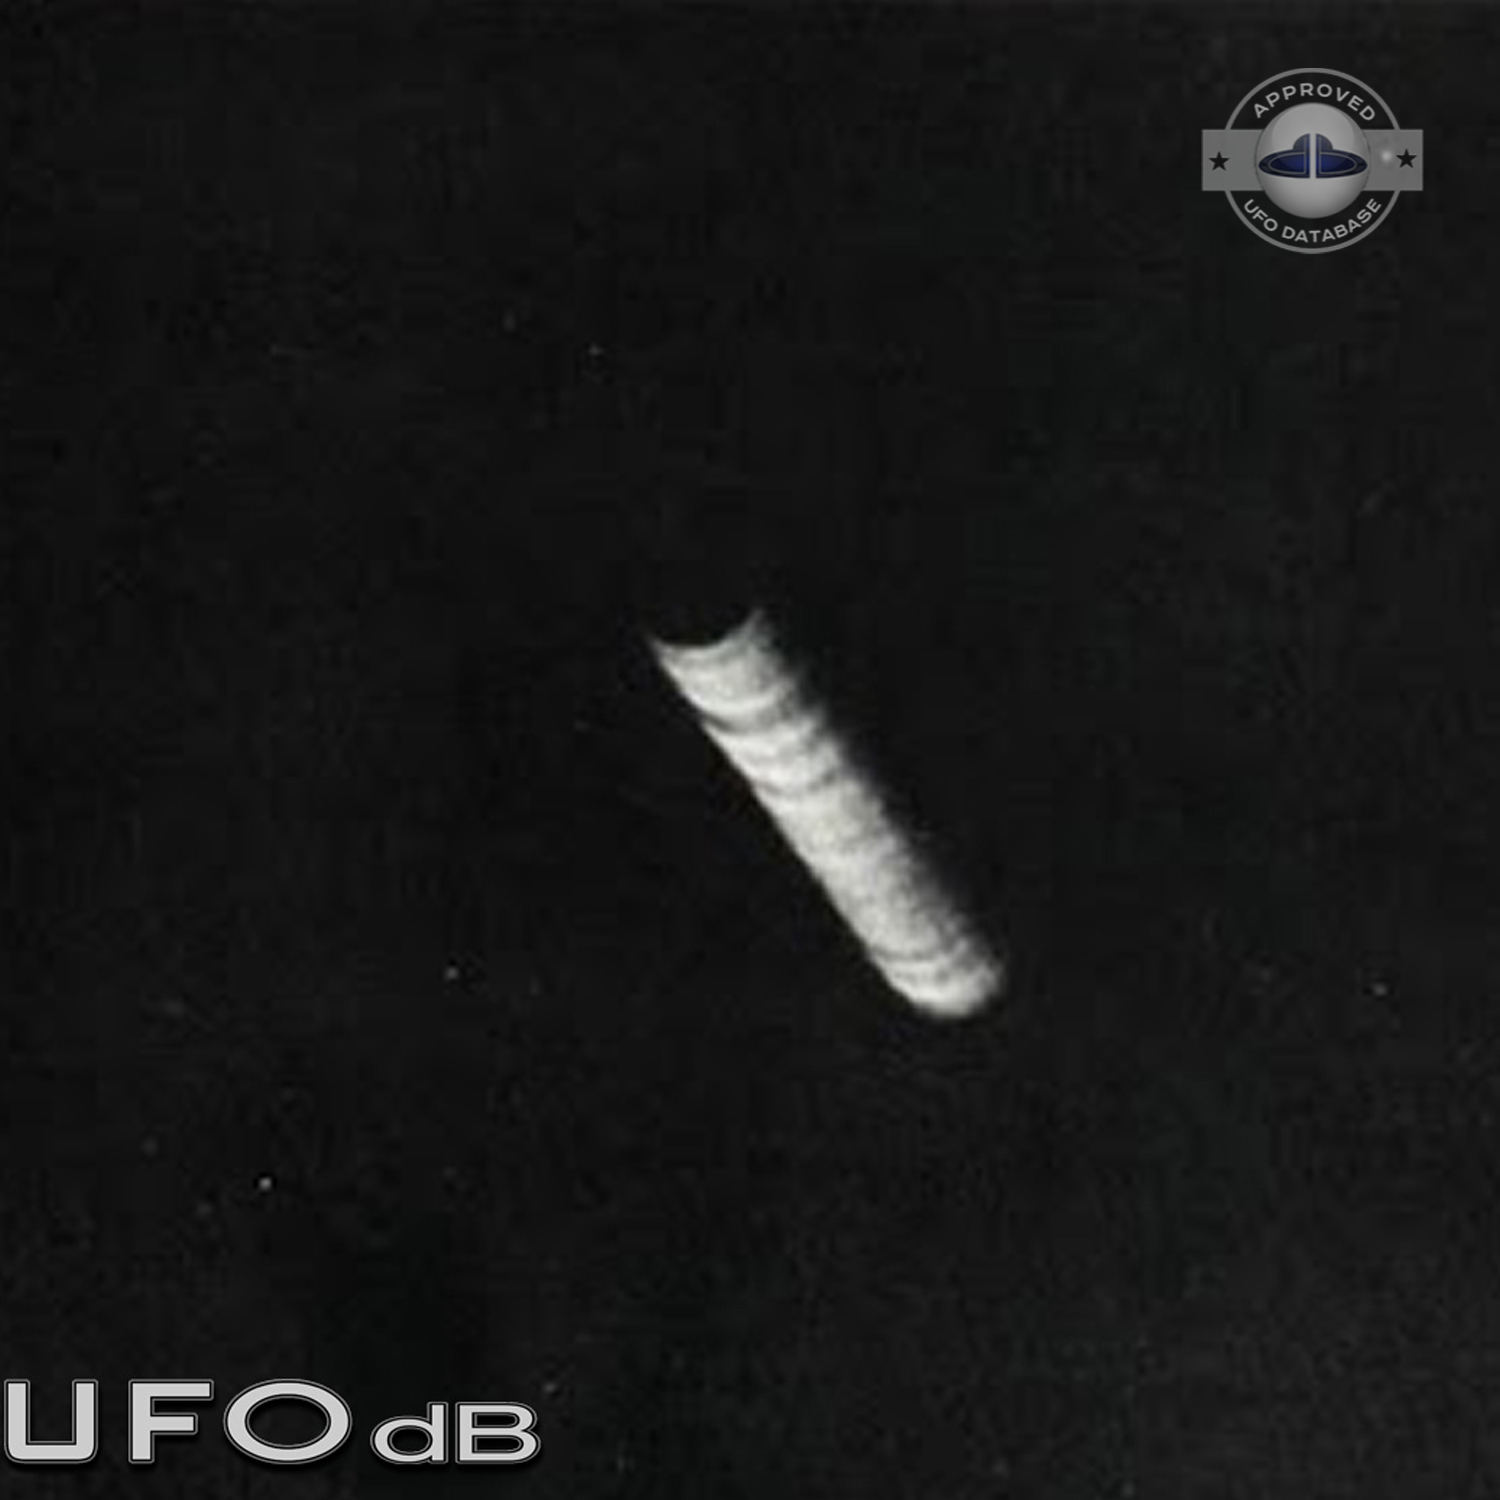 Tube shaped UFO - We can see the black hole at the end | New York UFO Picture #114-2